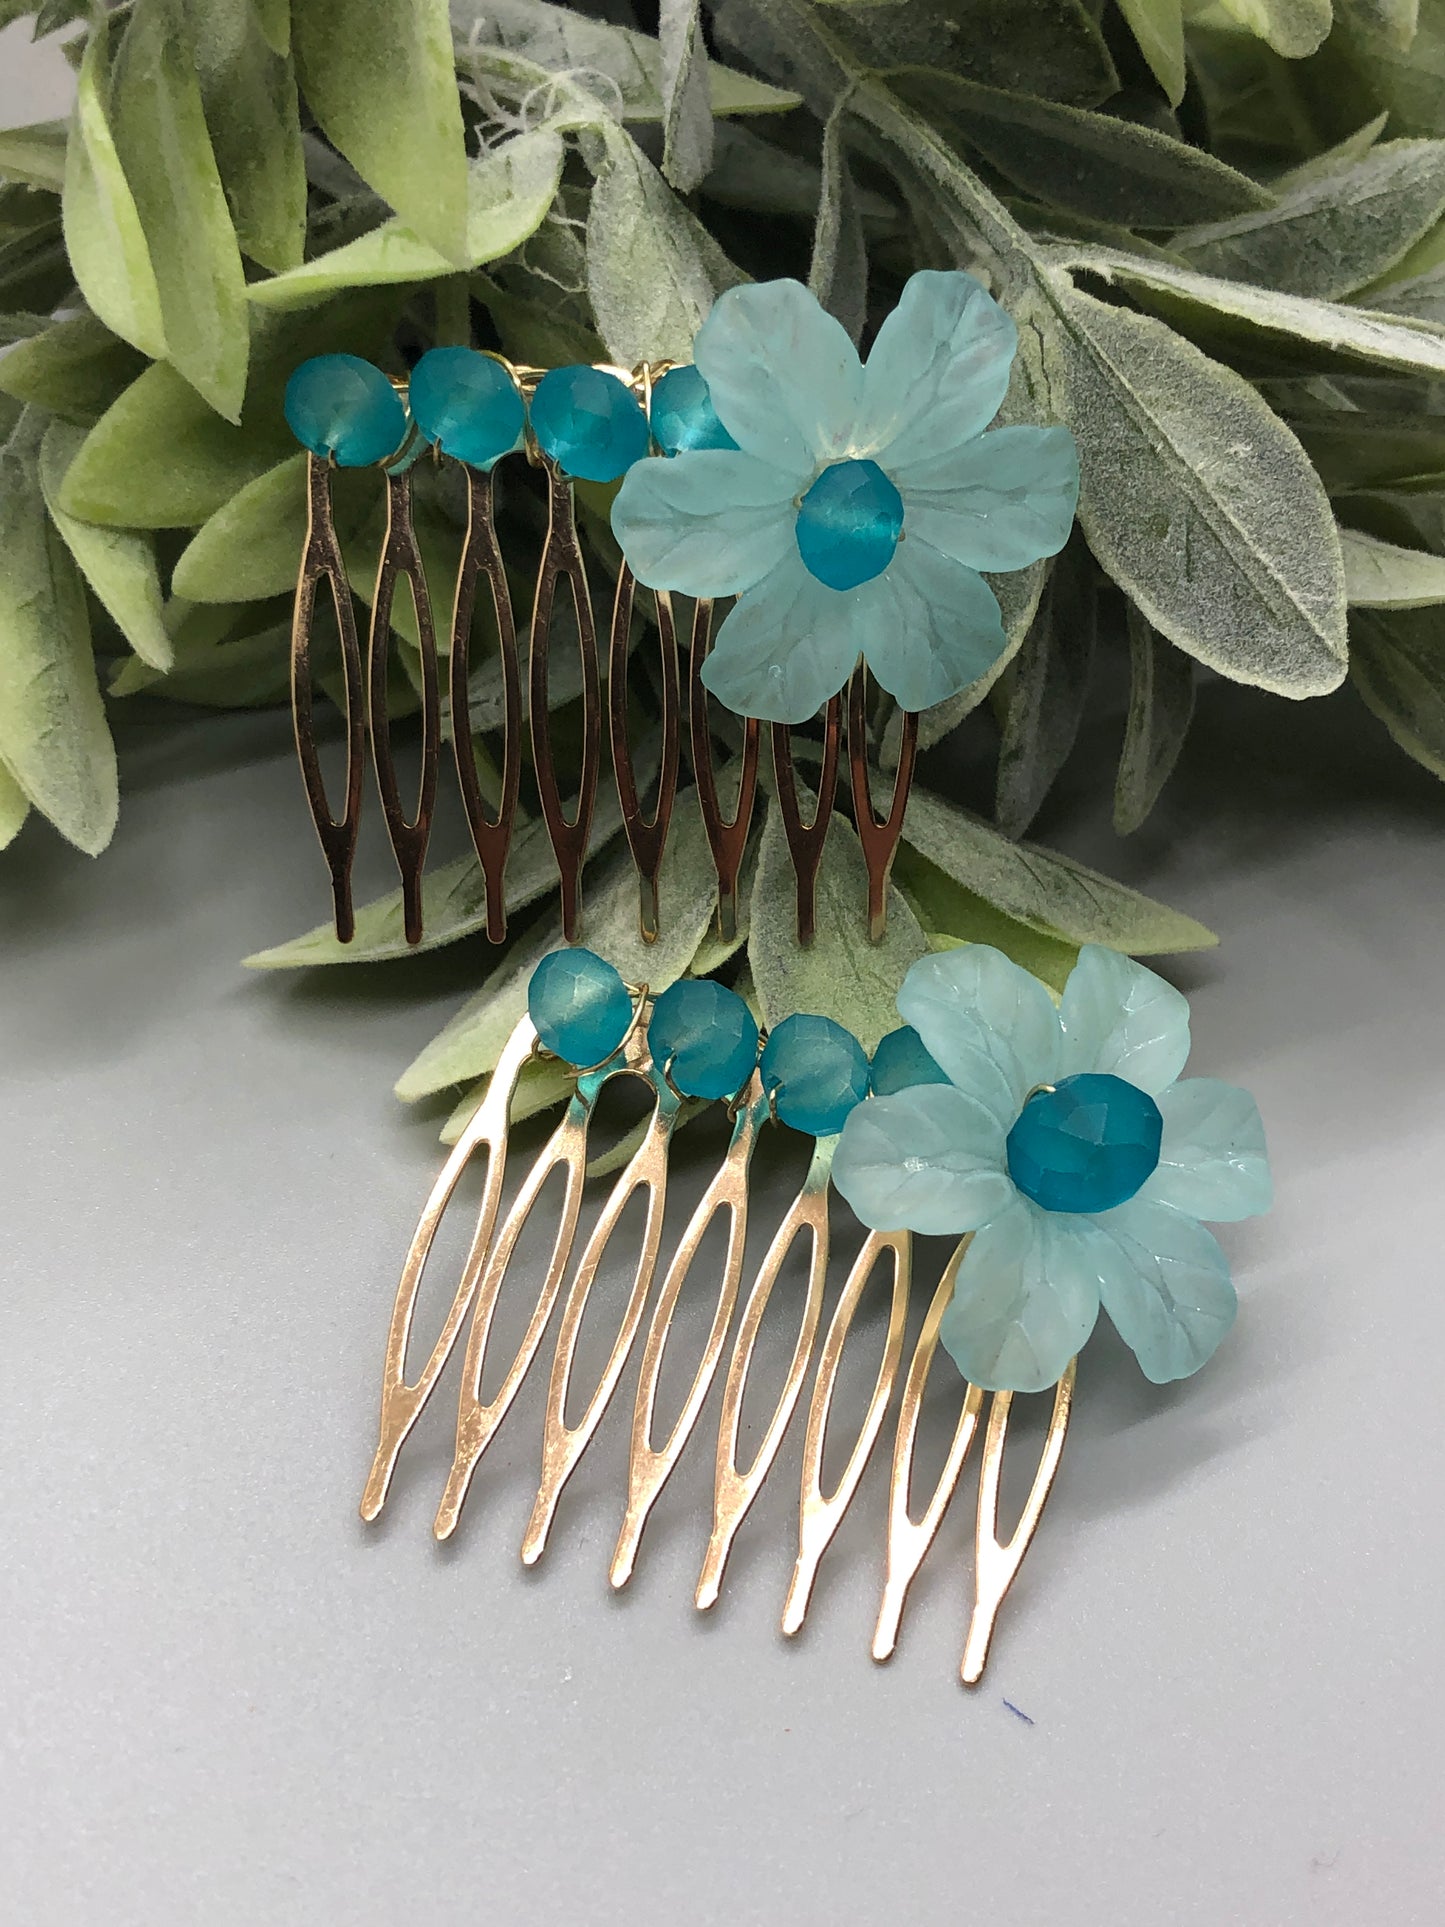 Baby Teal Acrylic Flower Teal  2.0" Beads Metal Side Comb Retro Vintage Style 2 pc